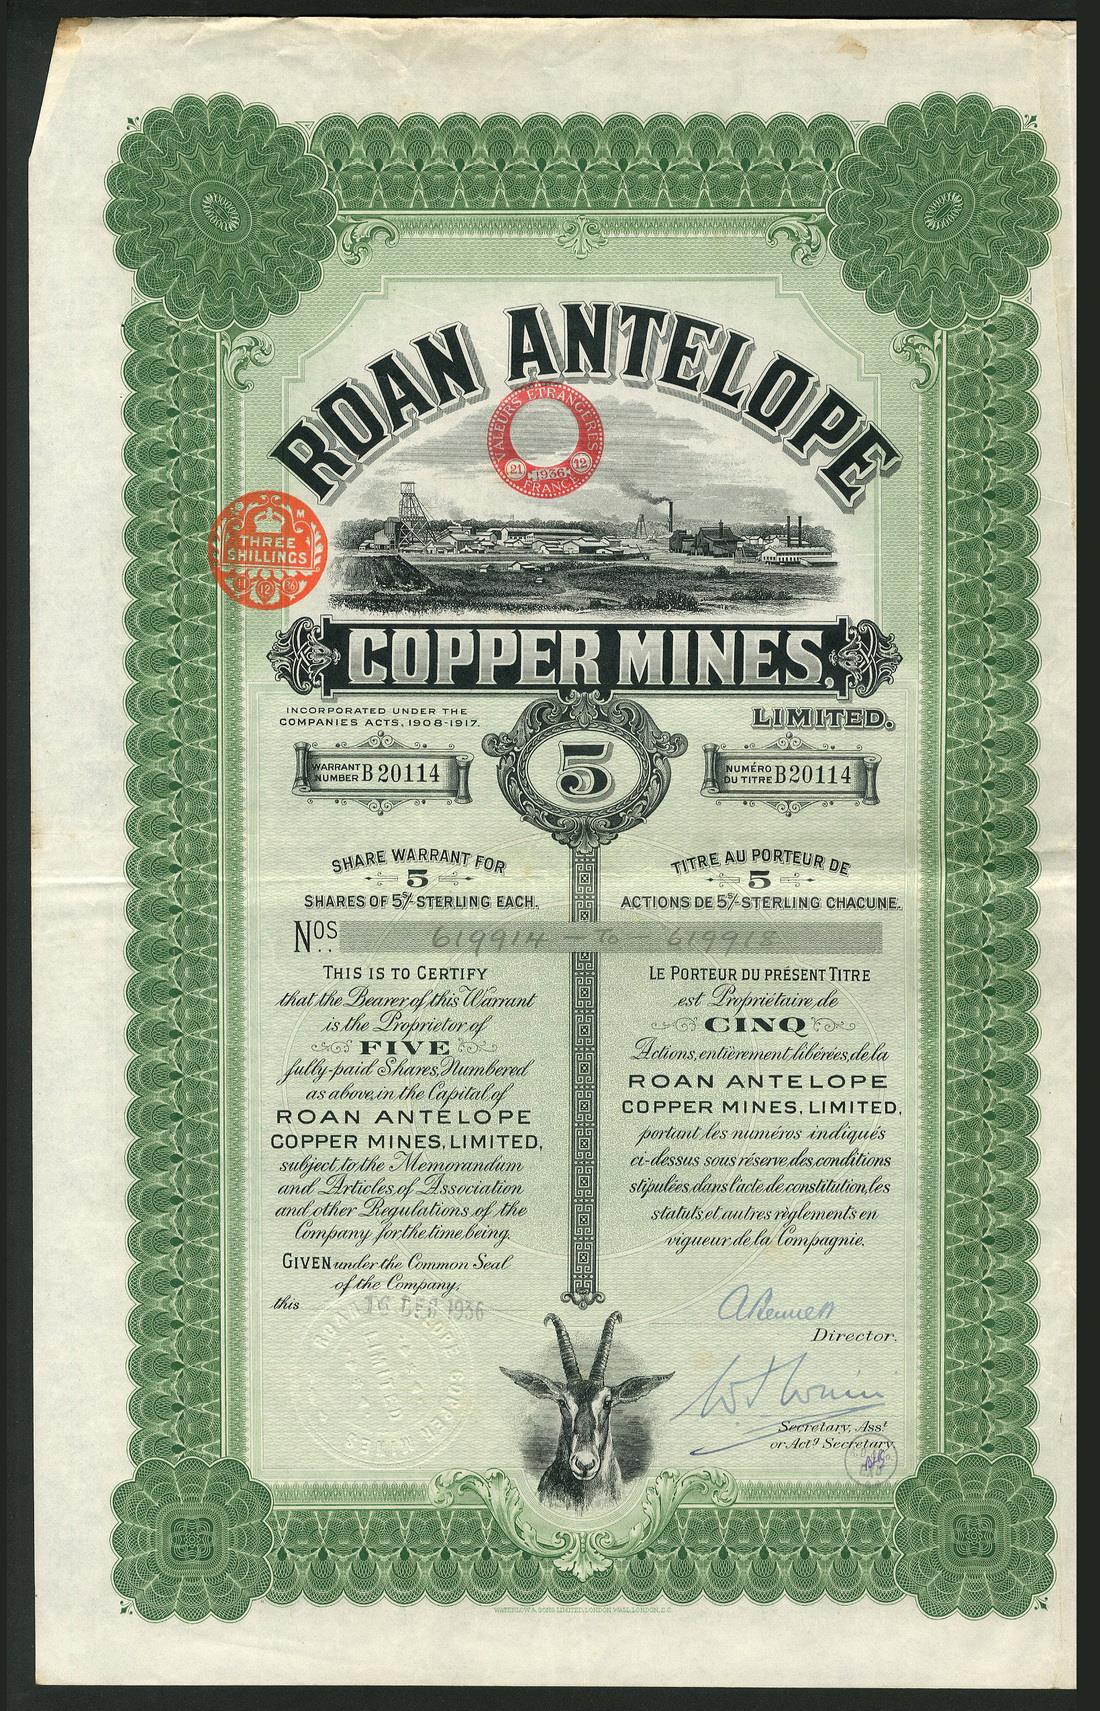 Roan Antelope Copper Mines Ltd., a set of 6 certificates for 1 share and 5 shares (5) of 5 shillings